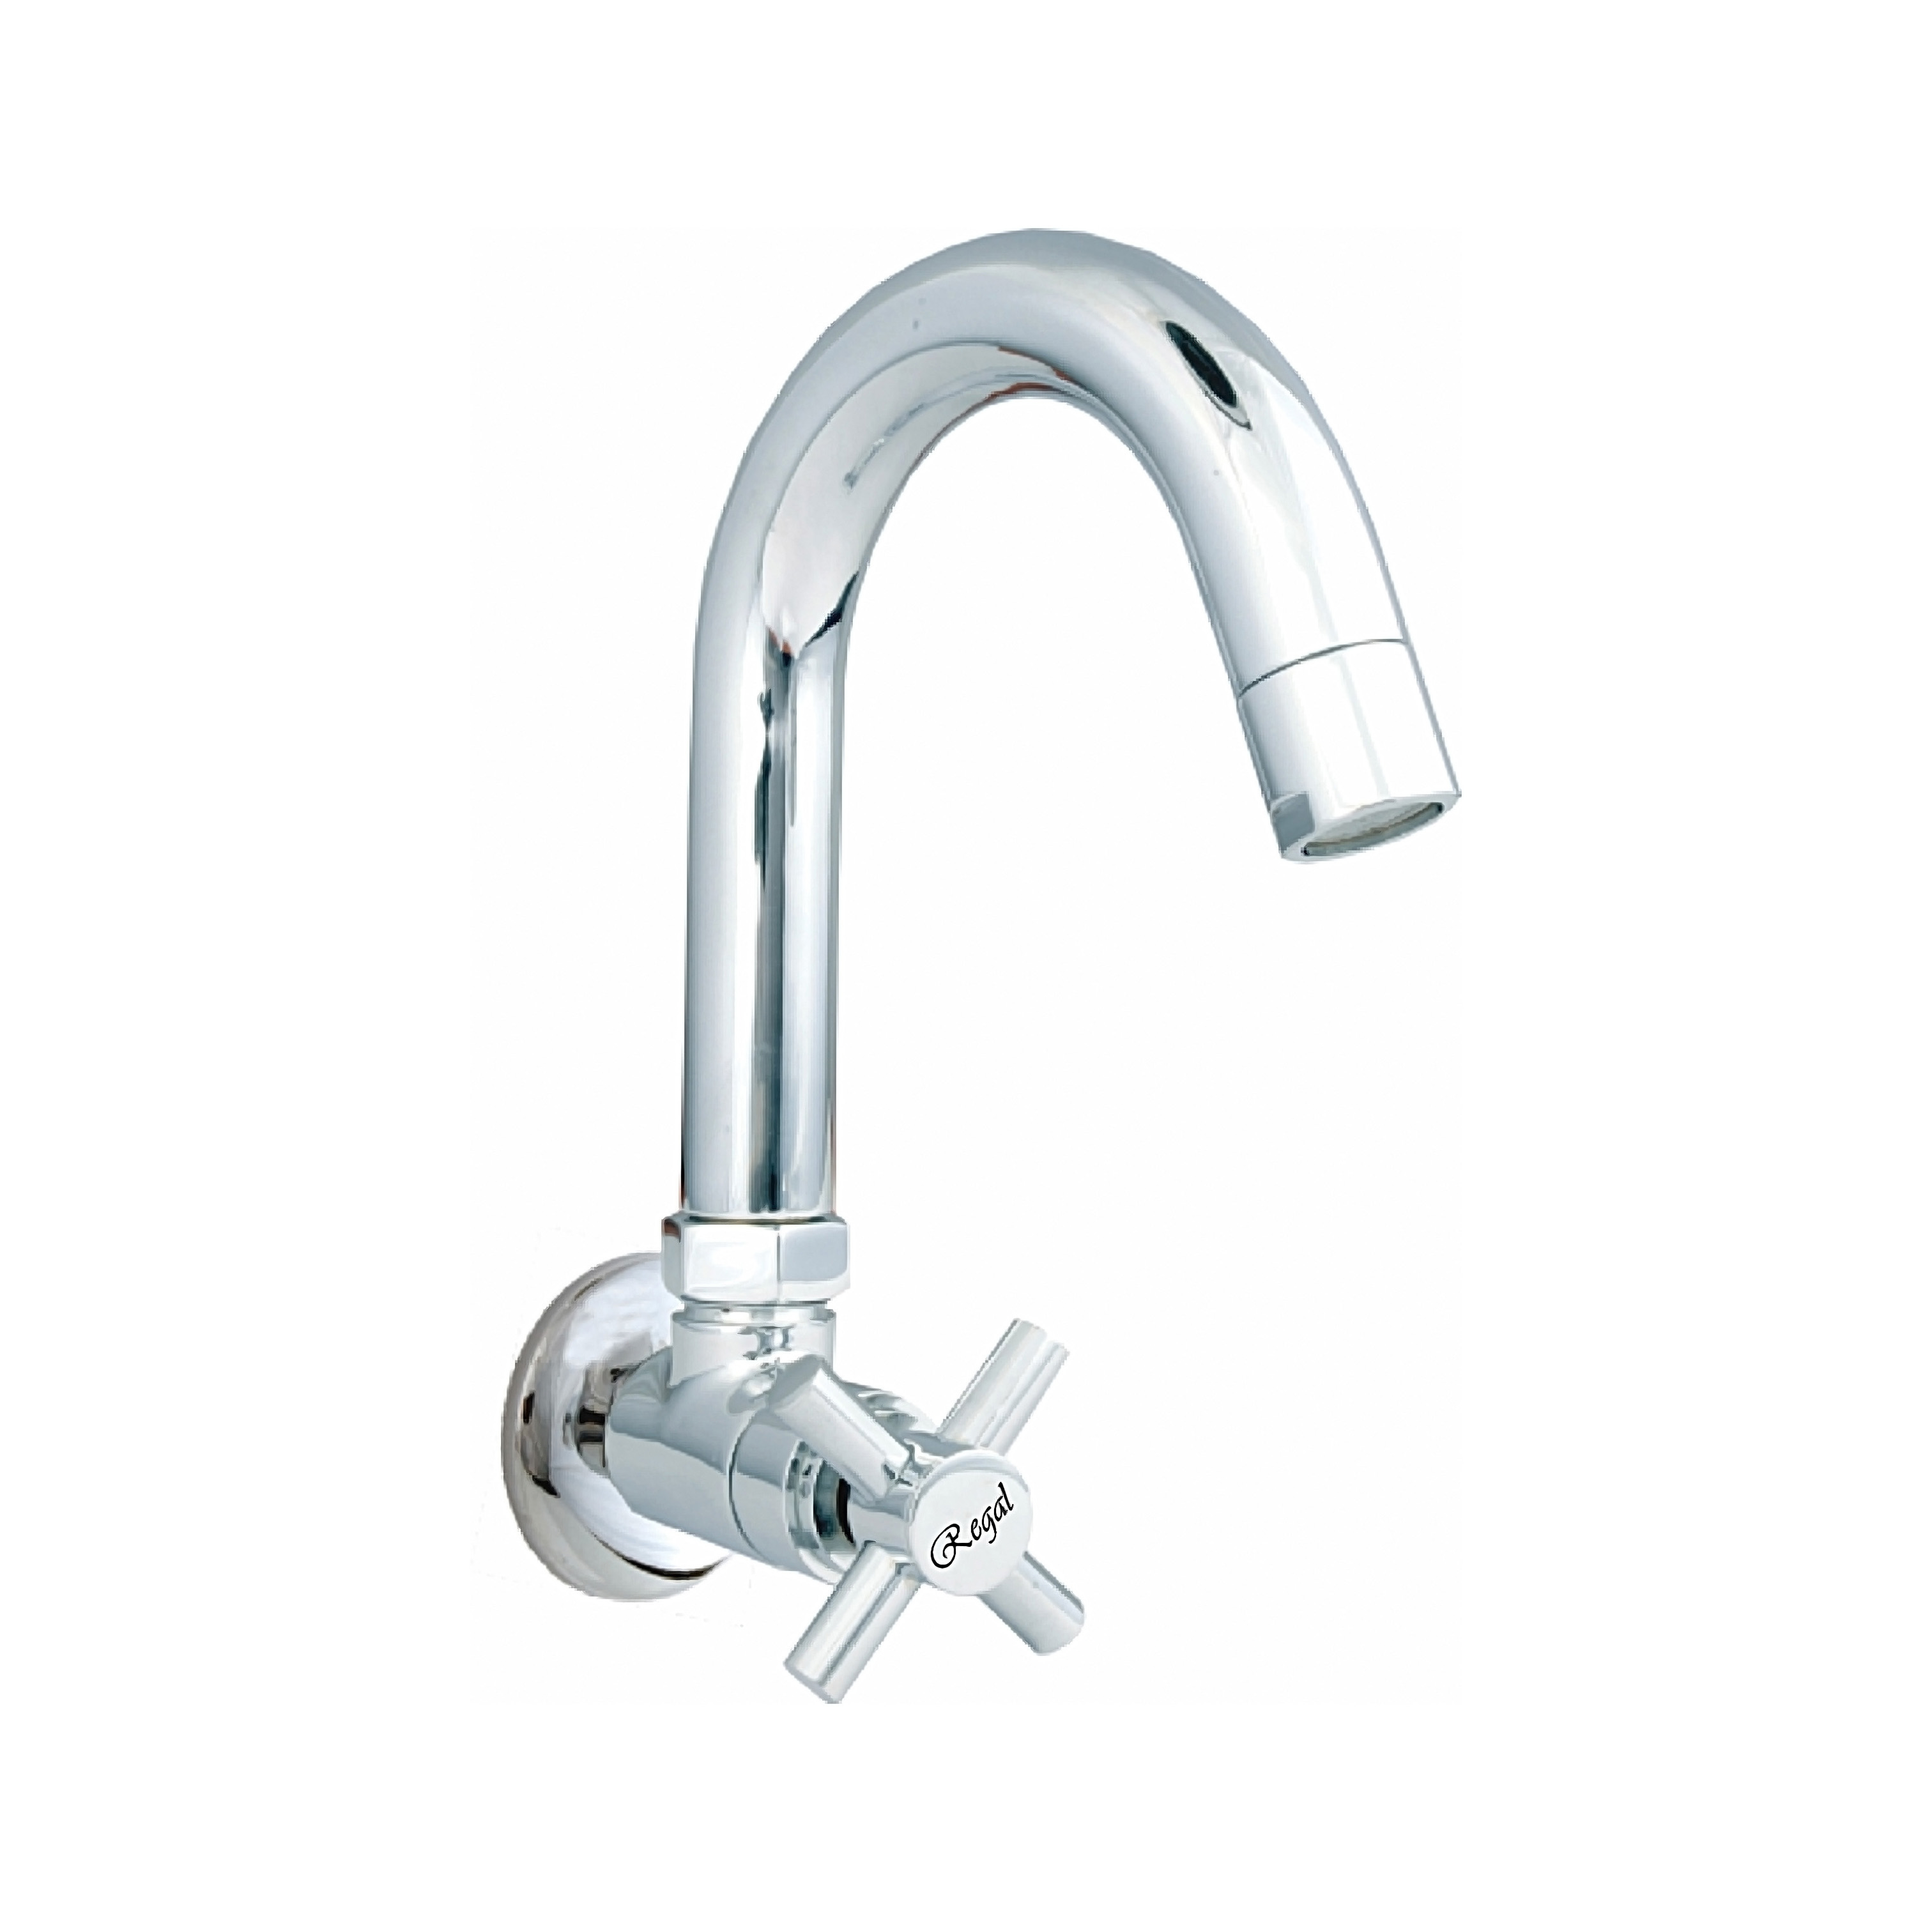 Andez Sink Cock Swivel Spout with Wall Flange